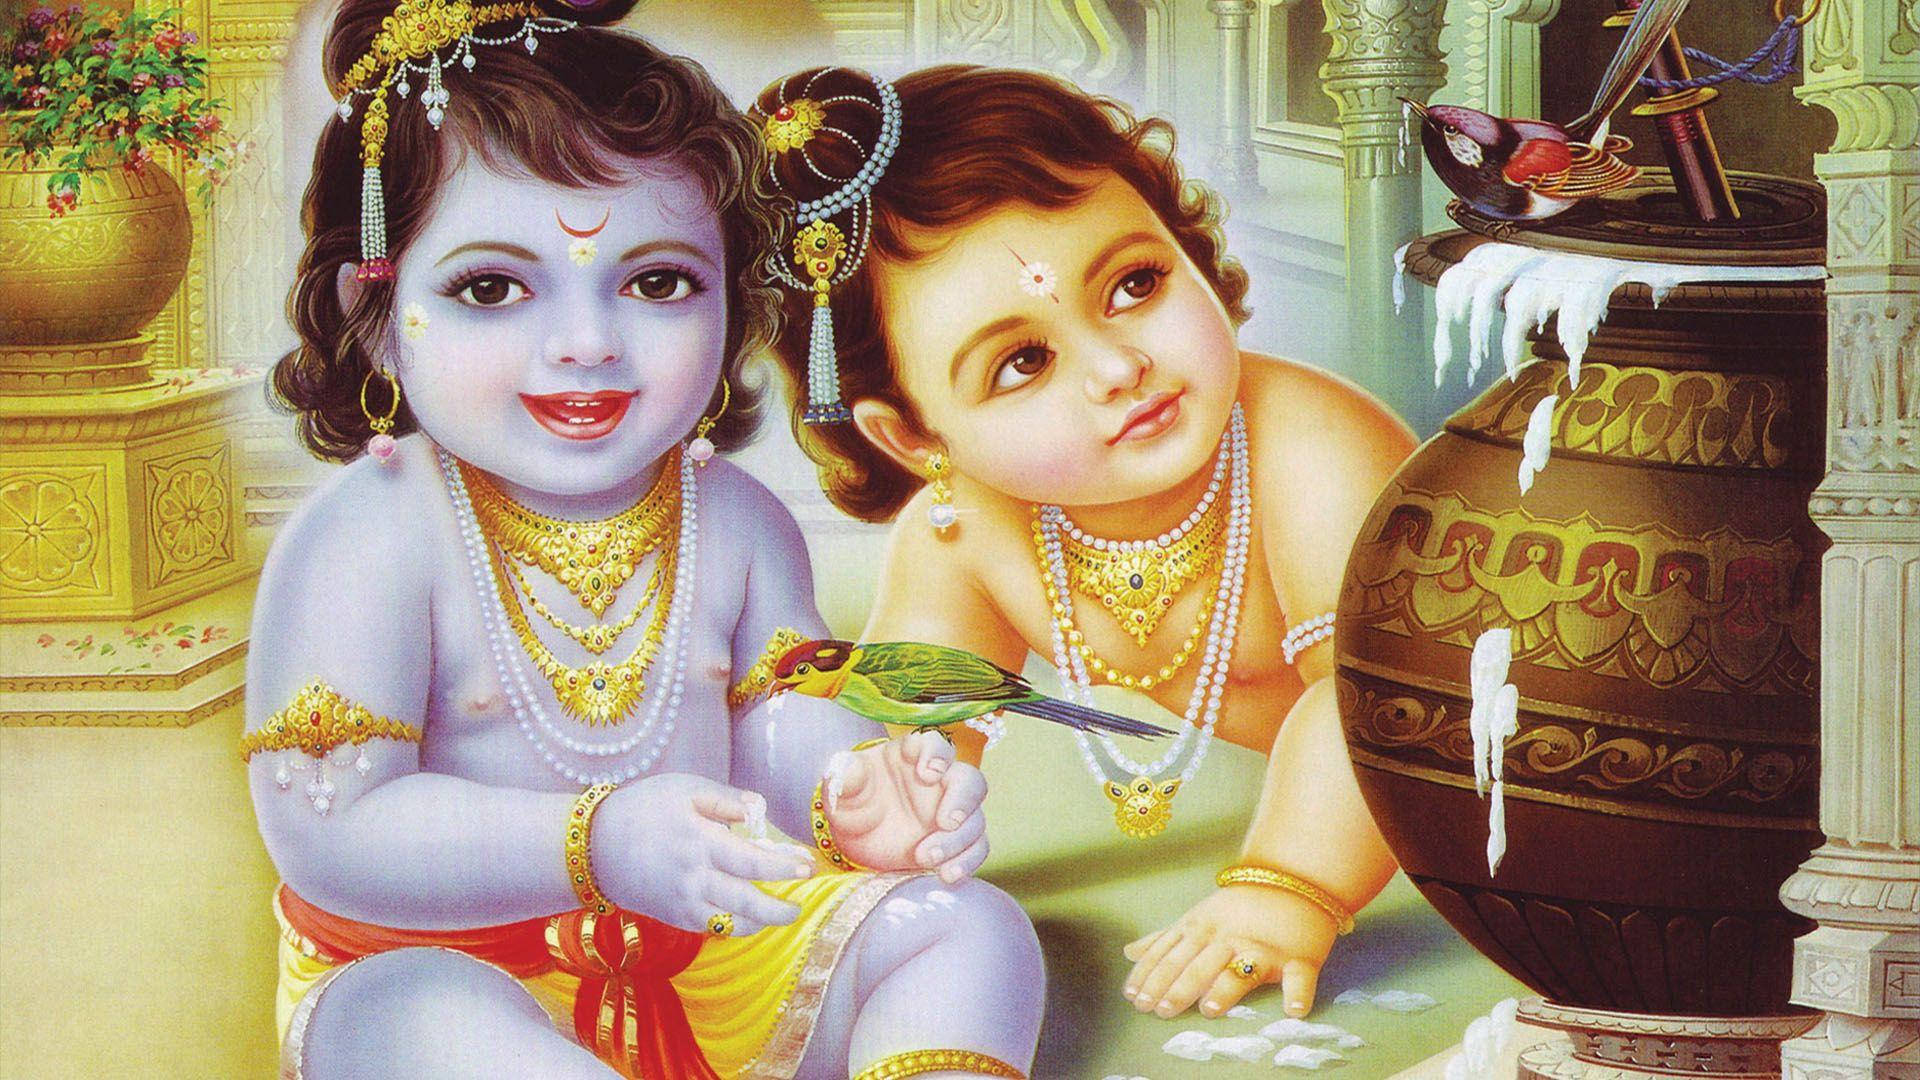 Little Krishna Younger Years